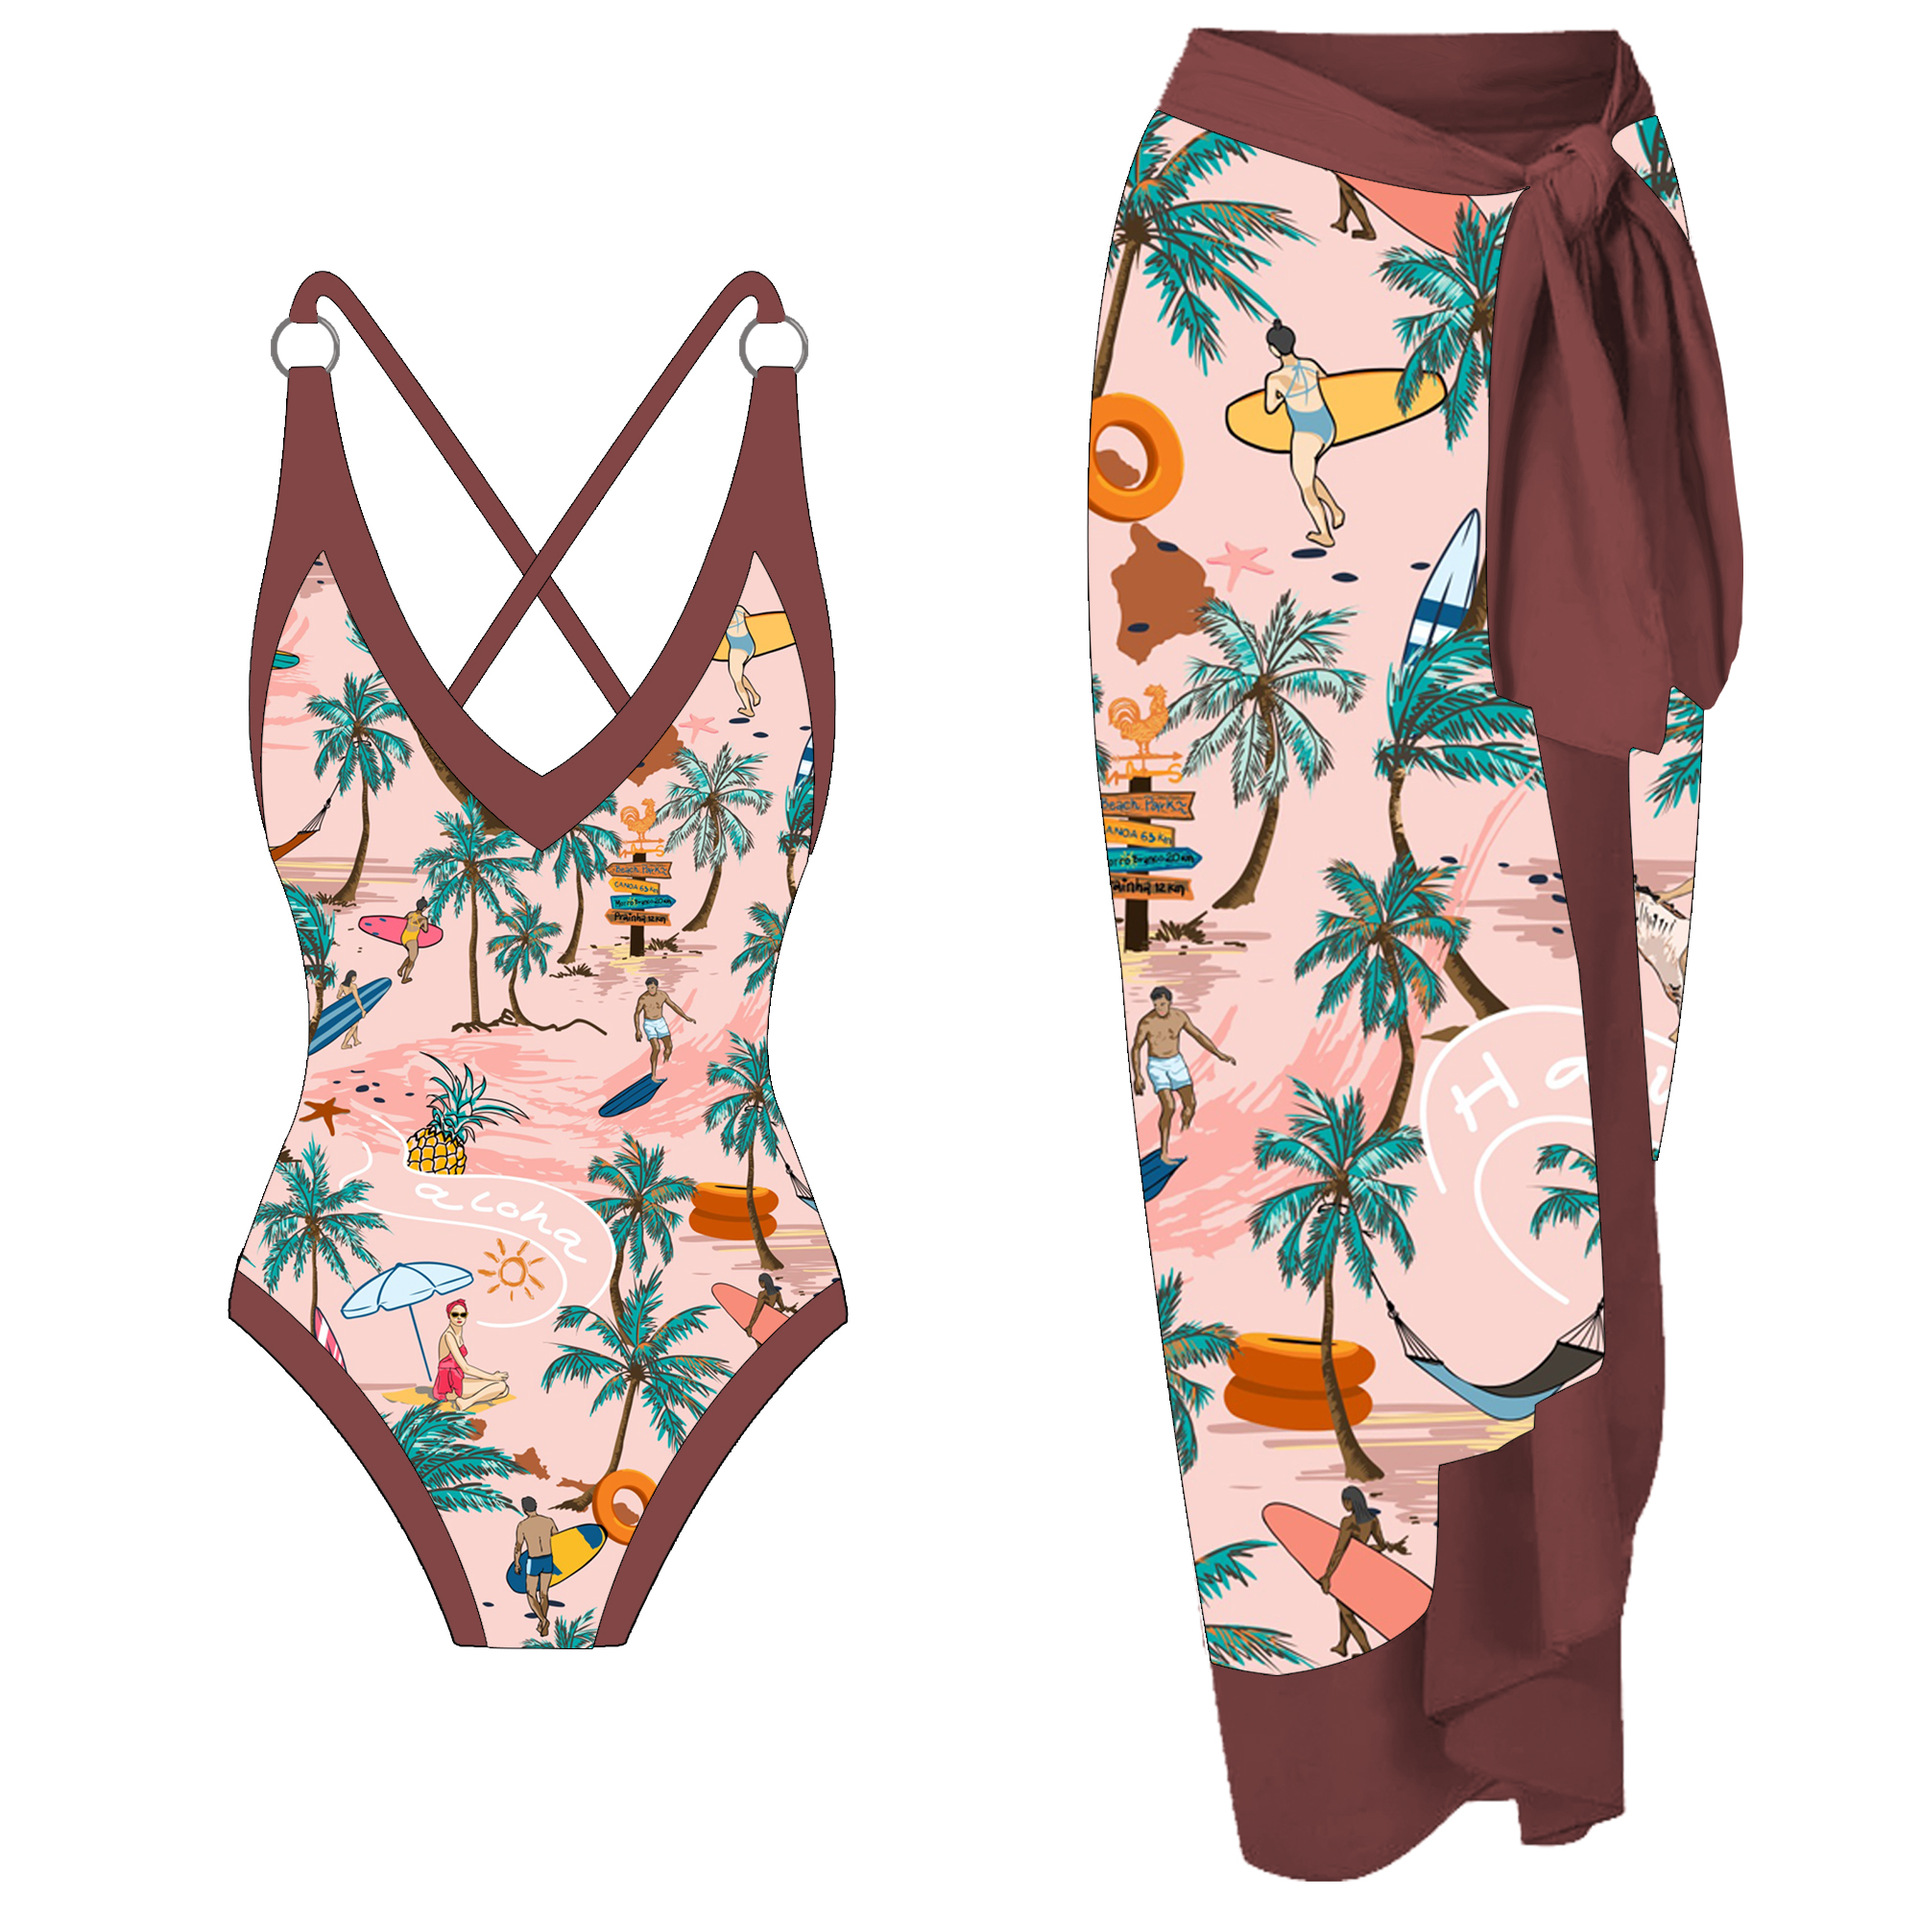 2023 New European and American Foreign Trade One-Piece Swimsuit Customized Coconut Printed Beach Overskirt Swimsuit for Women